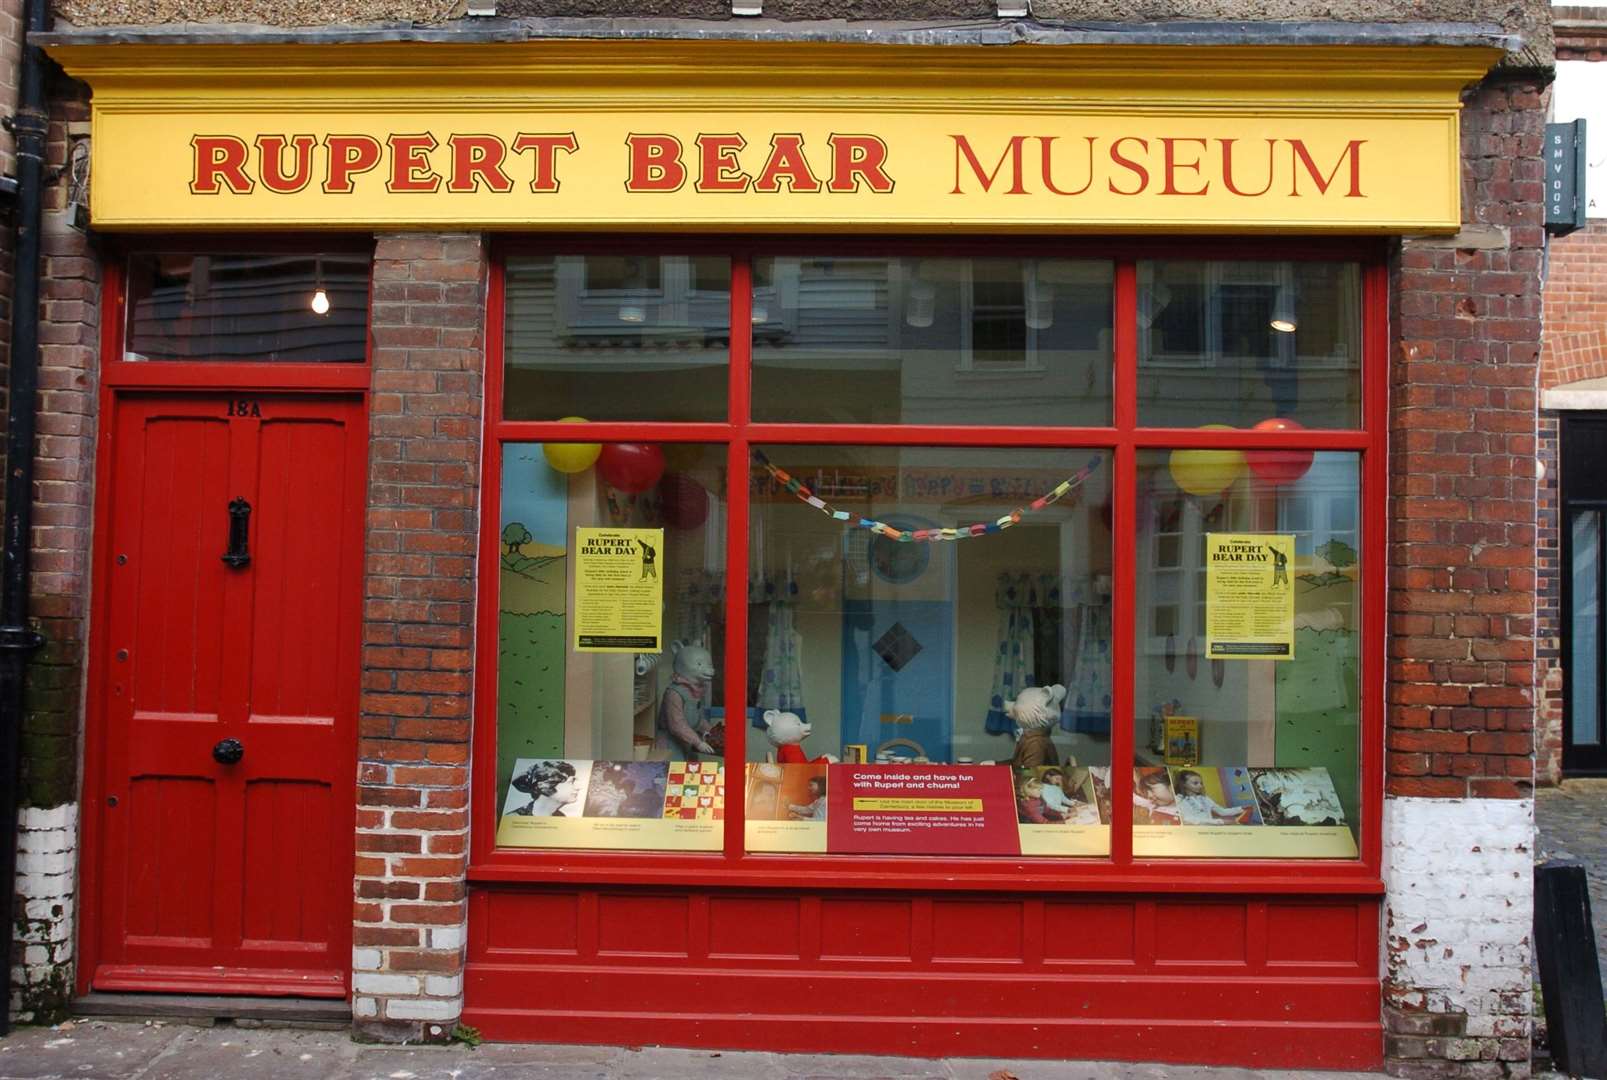 The former Rupert Bear Museum shop front in Canterbury – it has subsequently closed with the collection now housed at the Beaney